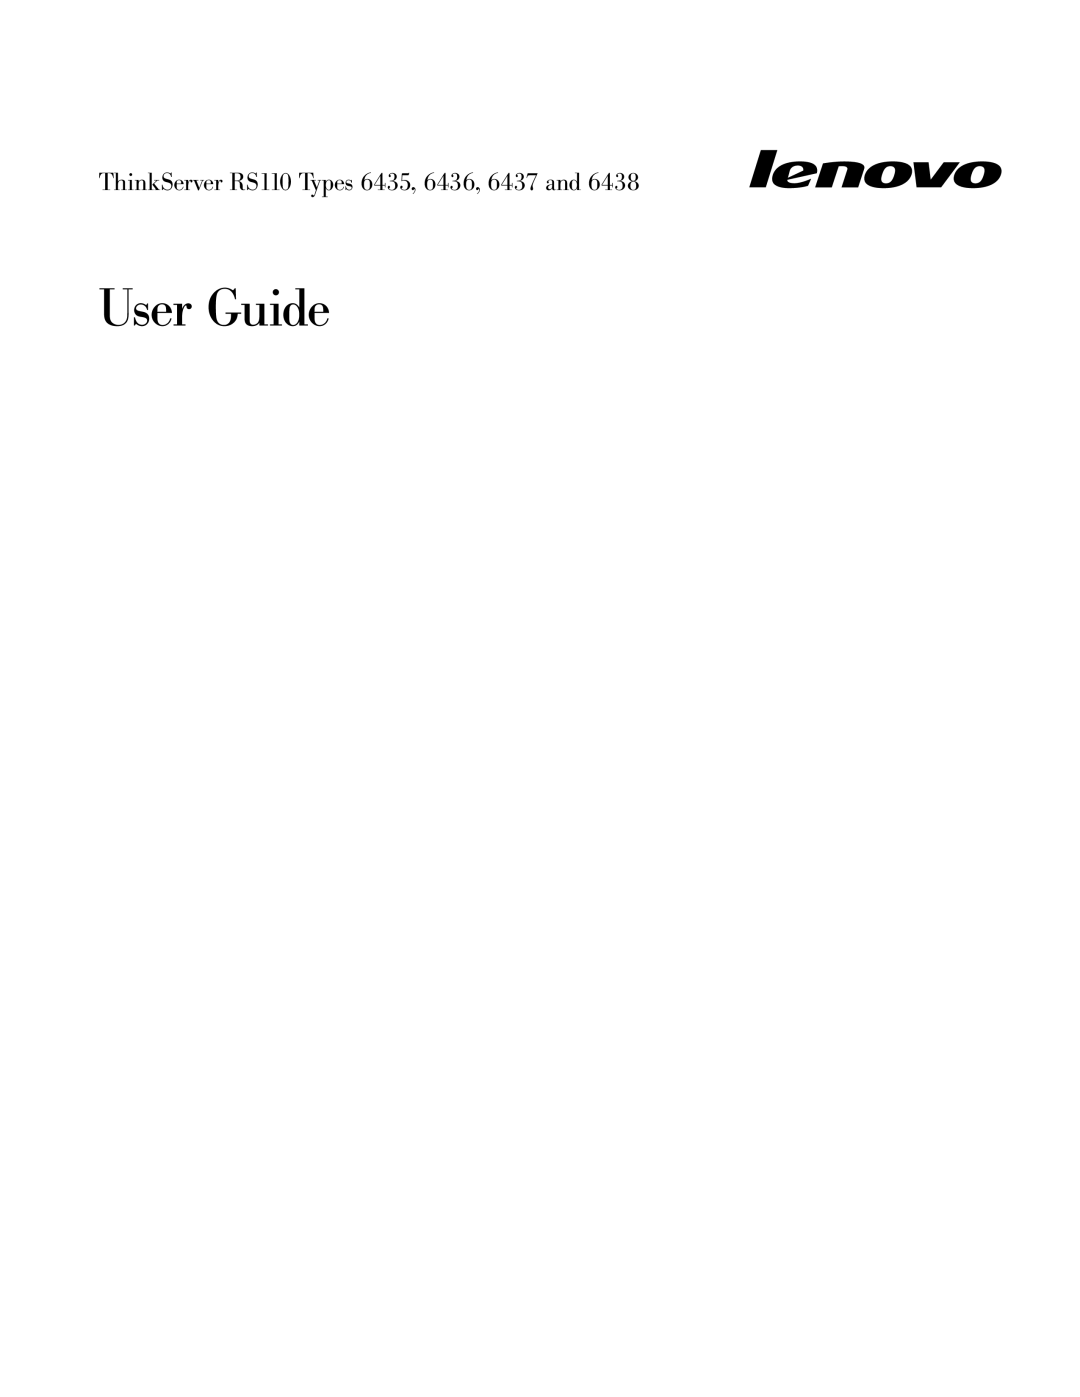 Lenovo 6438 manual User Guide, ThinkServer RS110 Types 6435, 6436, 6437 and 